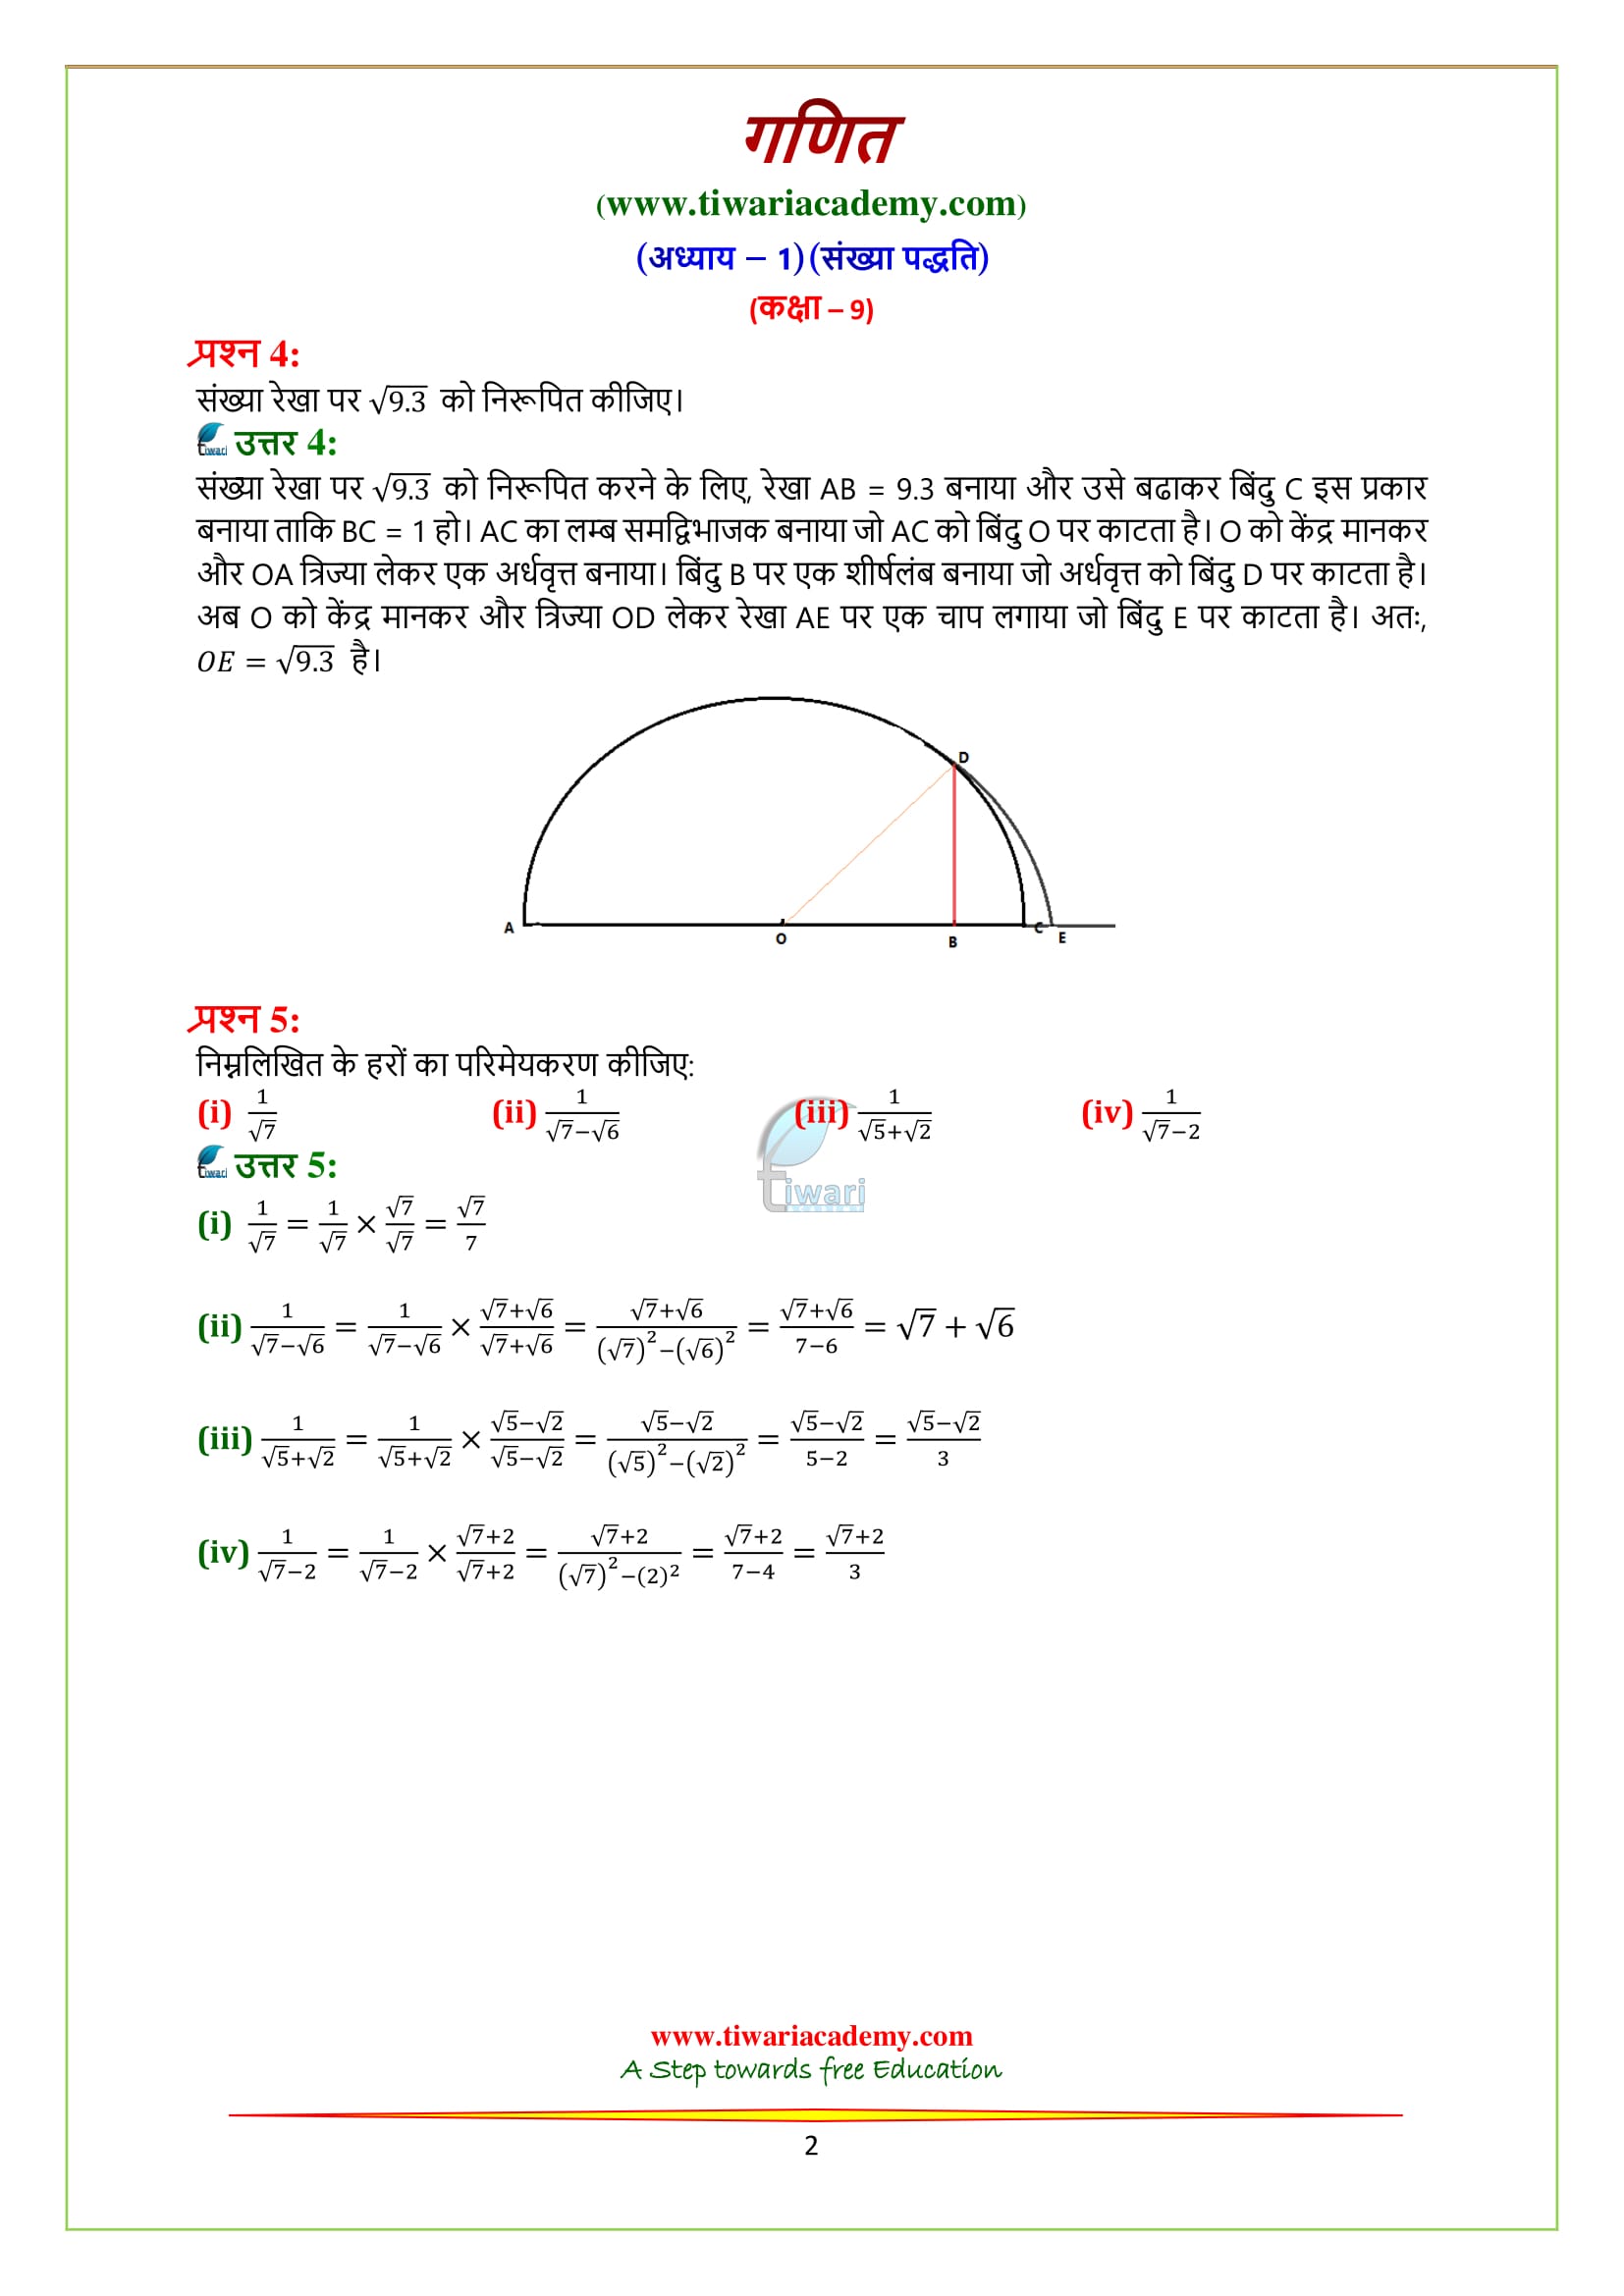 NCERT Solutions for Class 9 Chapter 1 Exercise 1.5 in Hindi PDF